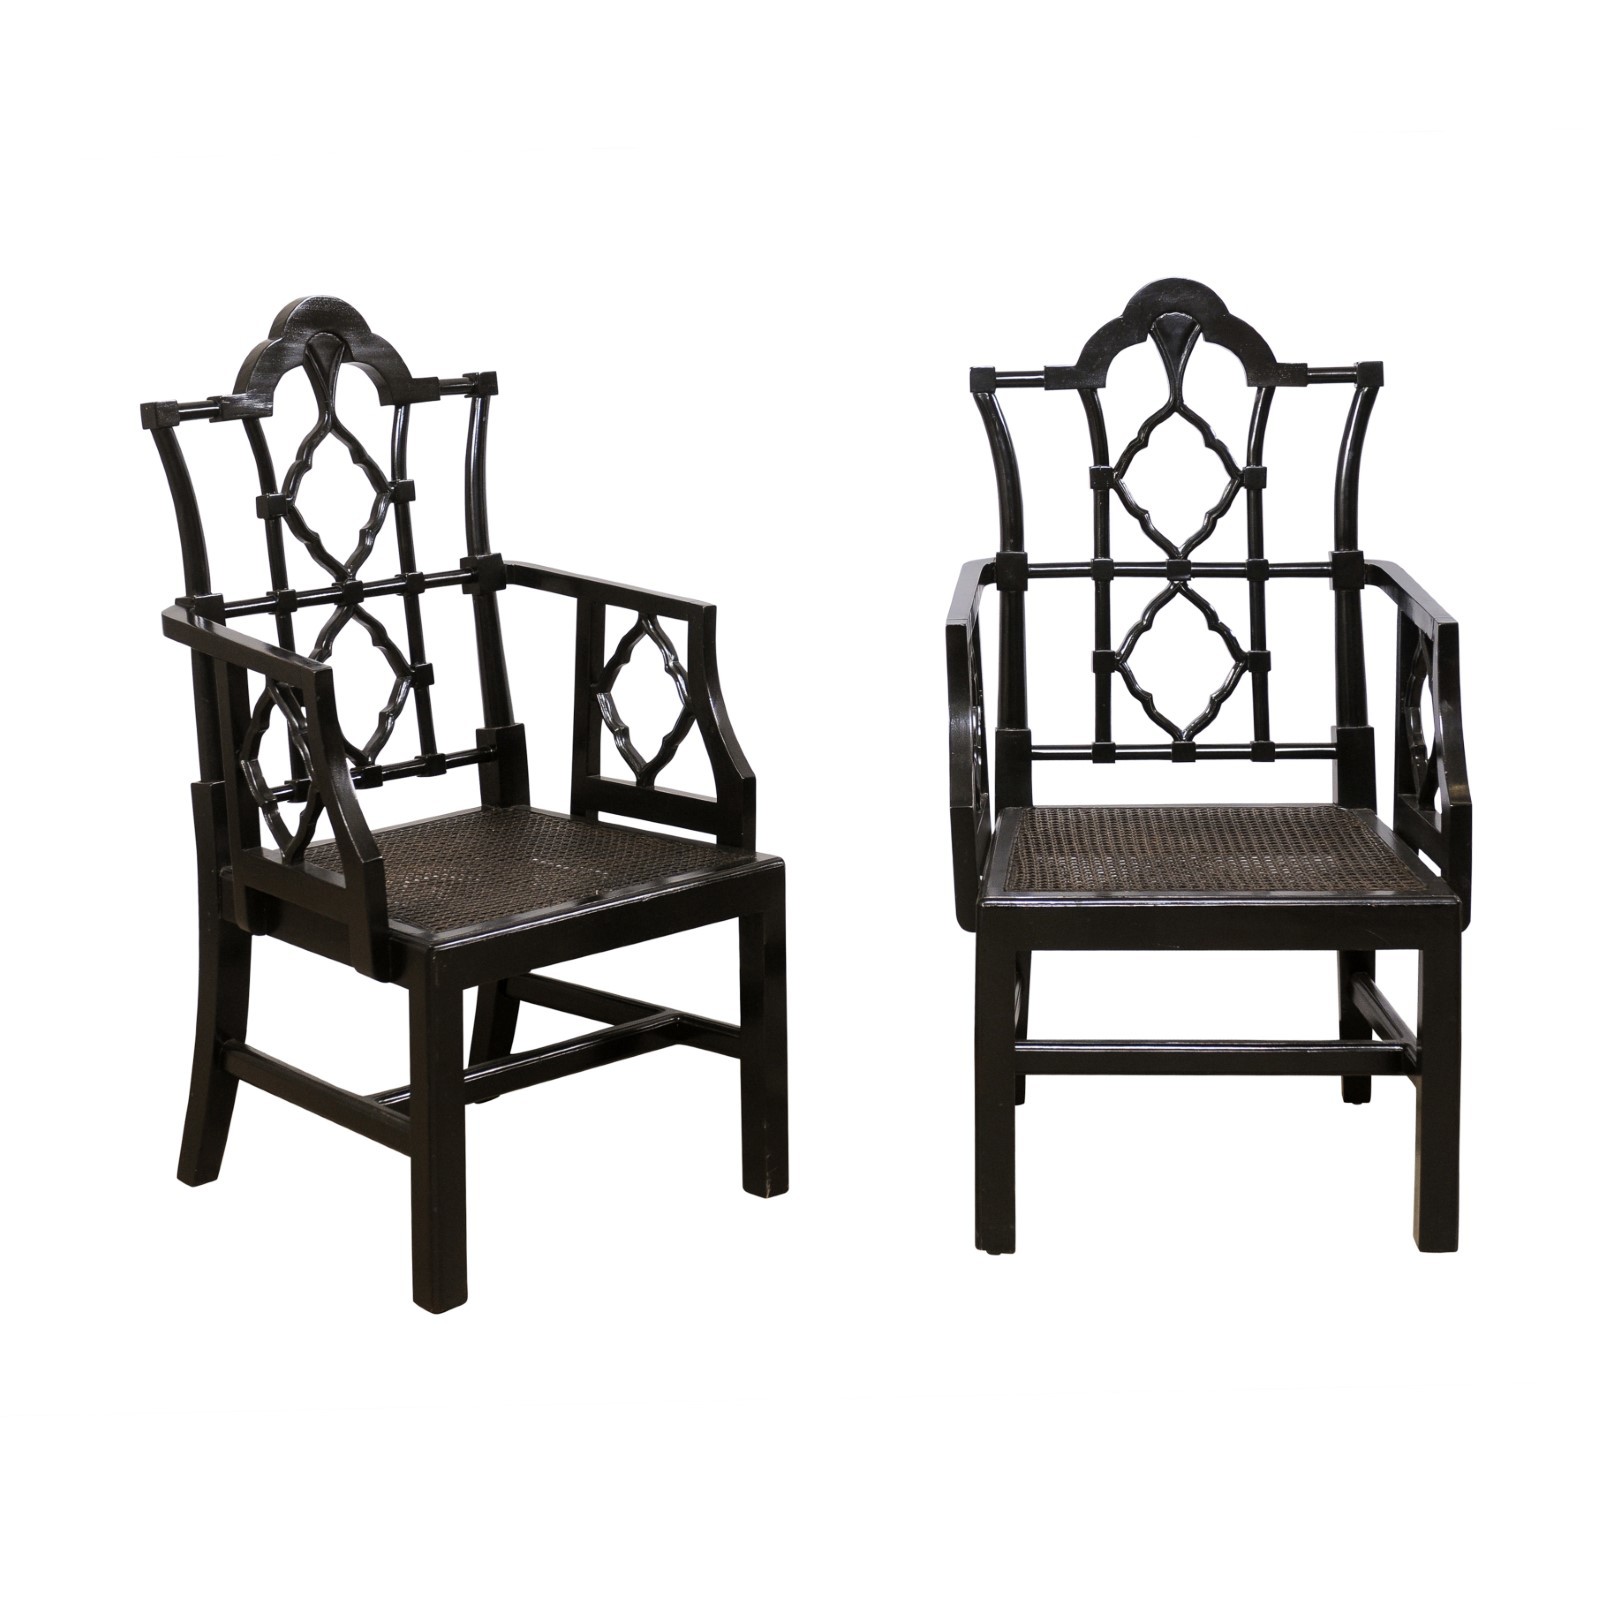 "Modern Chippendale" Style Cane Seat Chairs